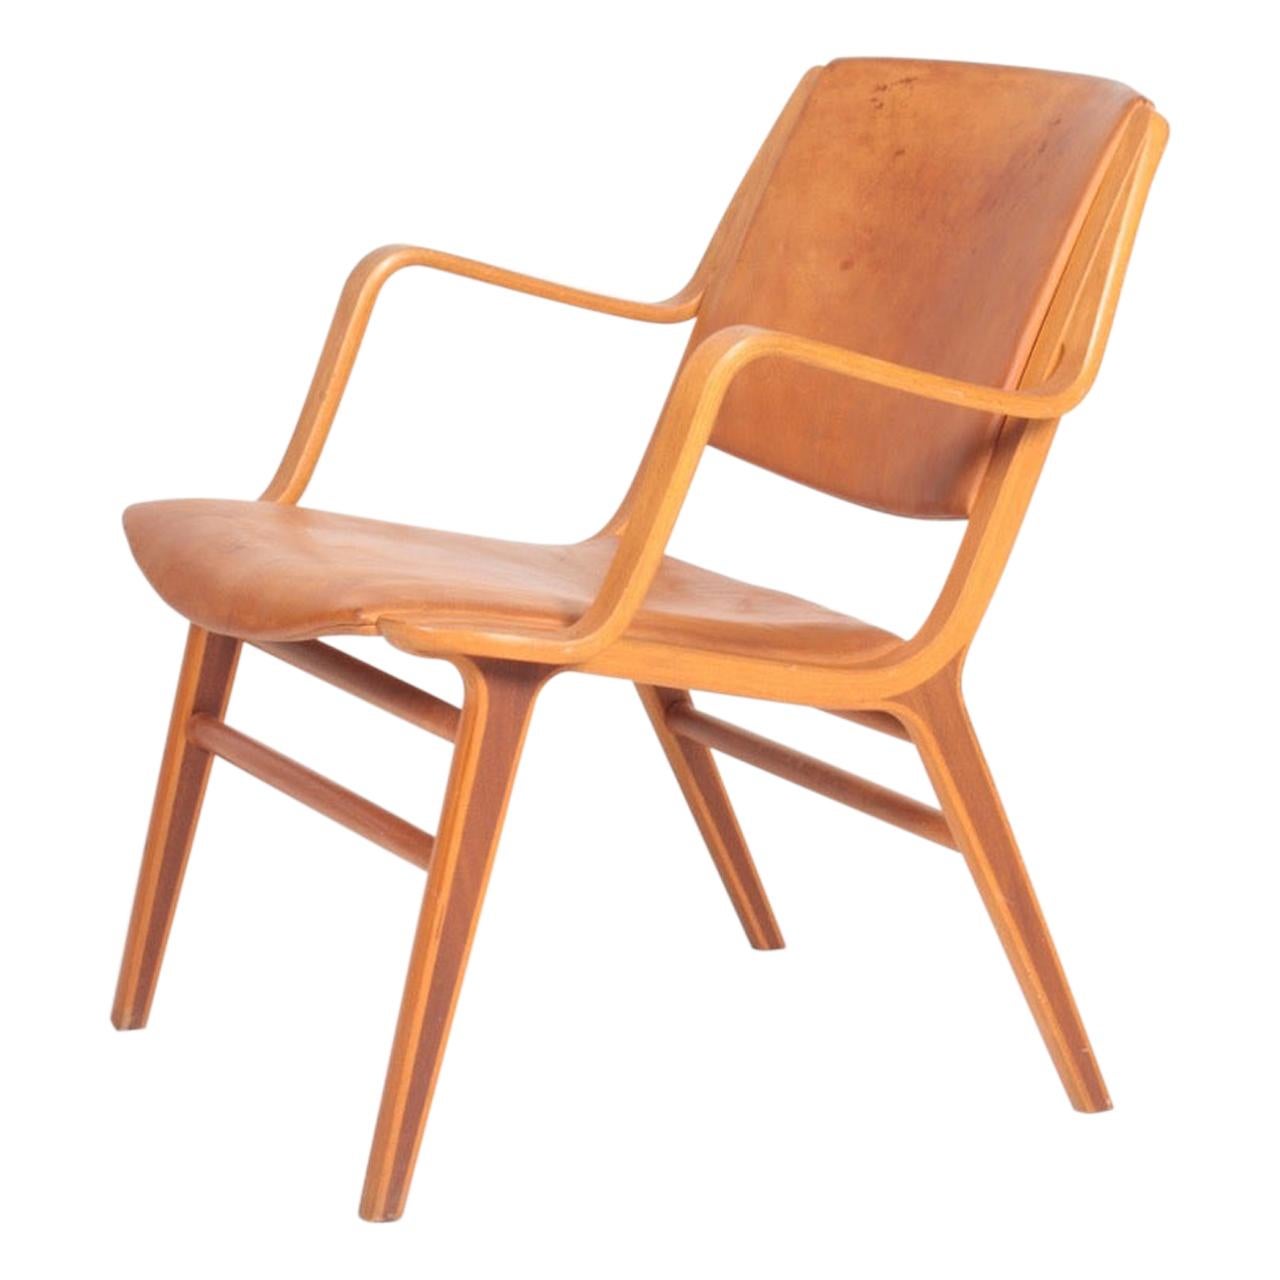 Midcentury Lounge Chair in Patinated Leather by Hvidt & Mølgaard, Danish Design